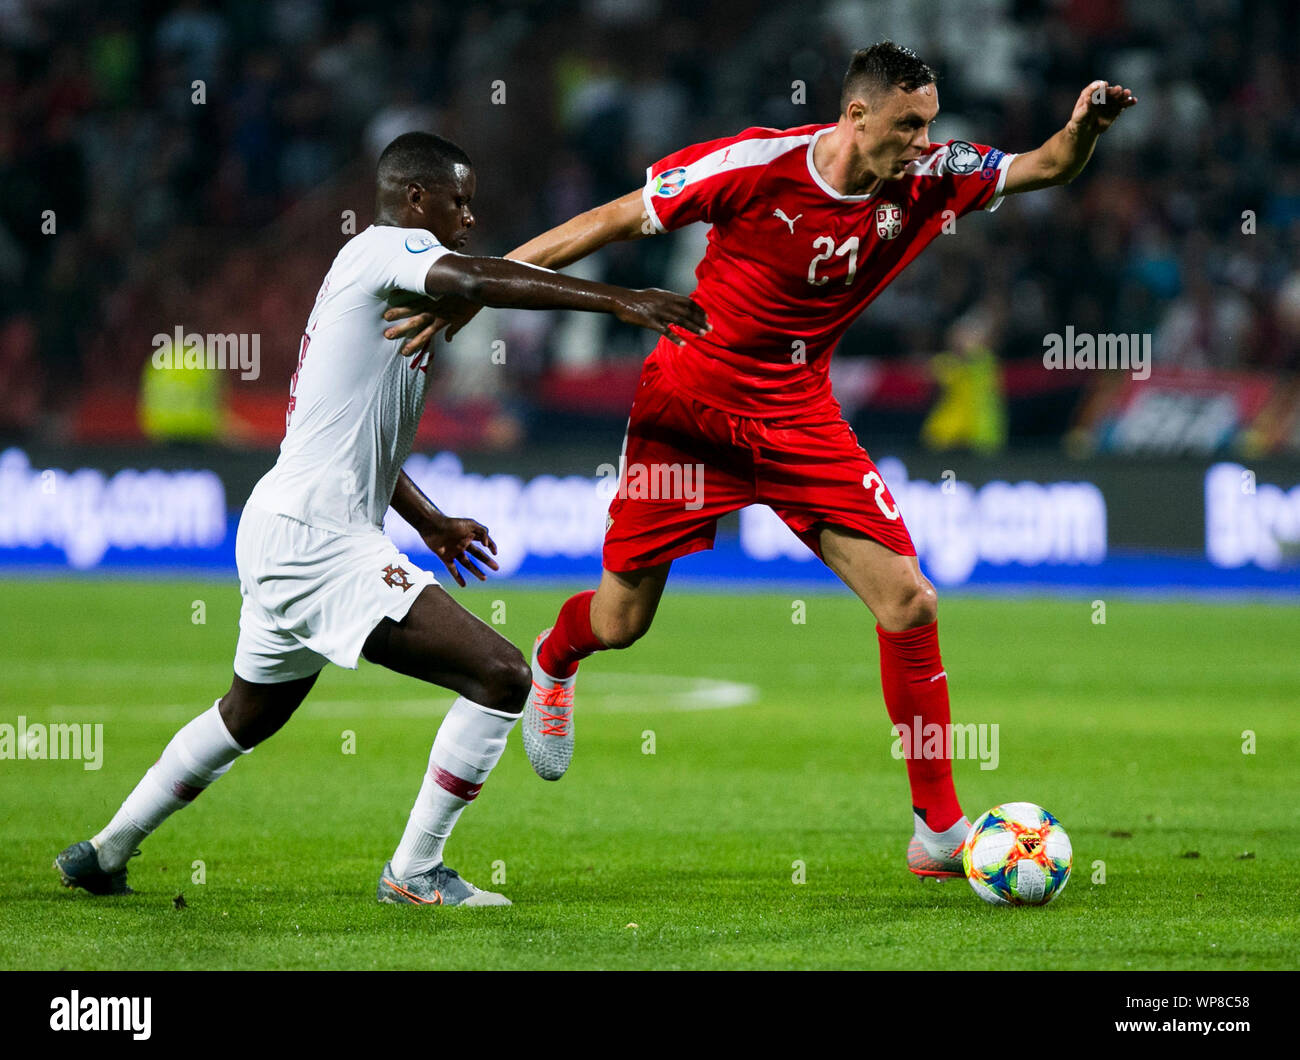 7th September 2019; Stadion Rajko Mitic, Belgrade, Serbia; European Championships 2020 Qualifier, Serbia versus Portugal; Milan Pavkov of Serbia competes against William Carvalho of Portugal - Editorial Use Only. Stock Photo